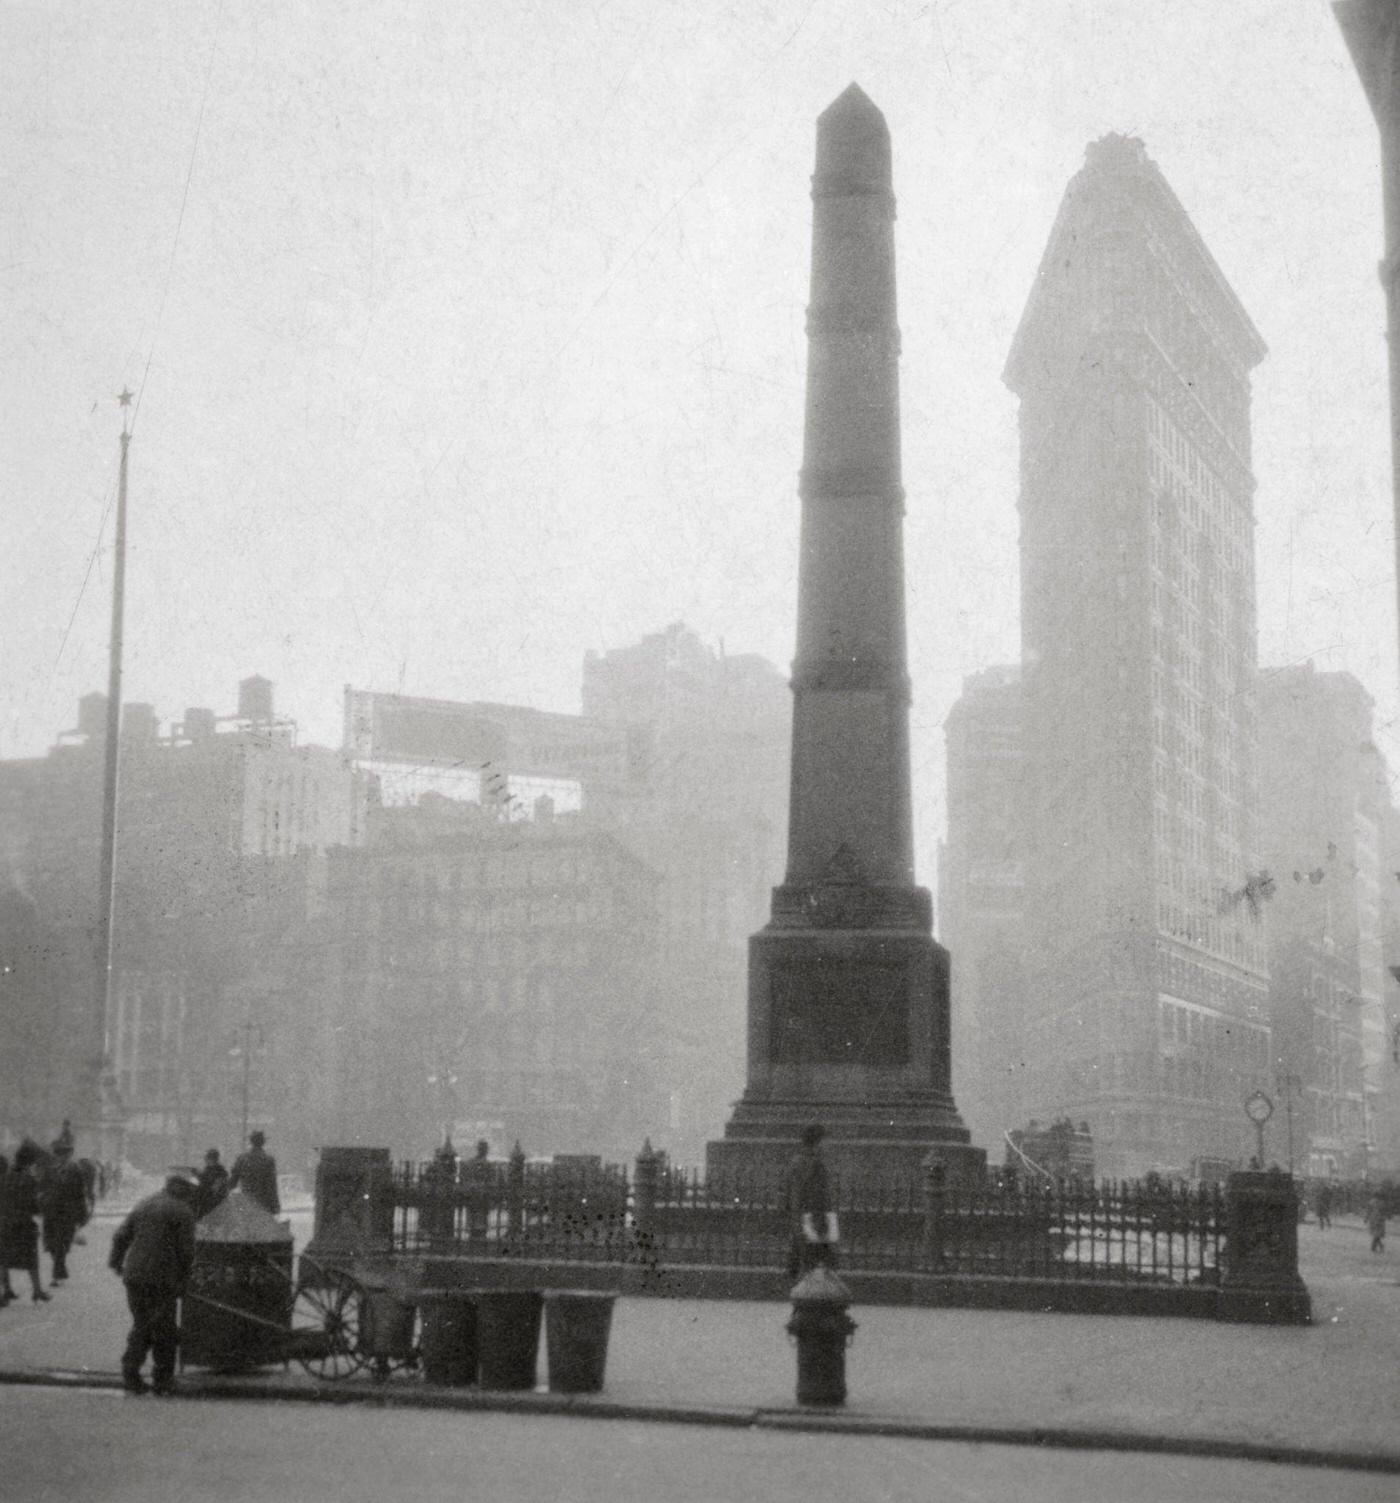 Flatiron Building, One Of The Tallest Buildings In New York City When Completed In 1902, Designed In Beaux-Arts Style, 1900S